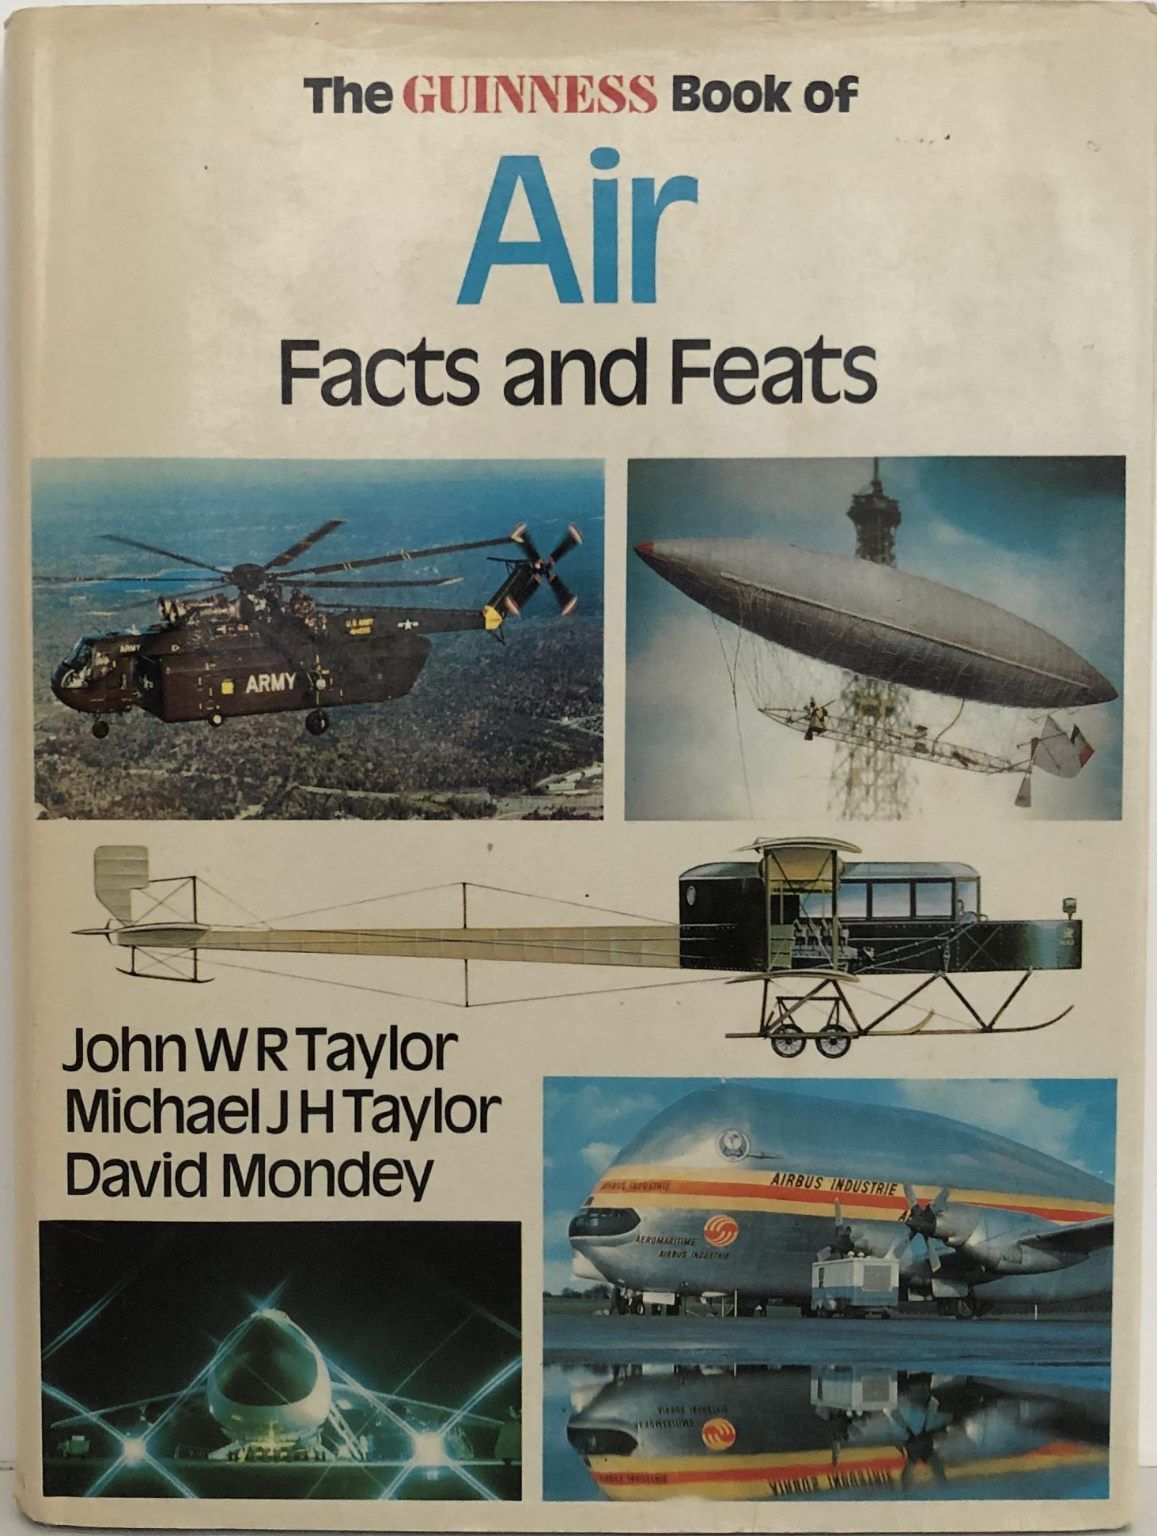 THE GUINNESS BOOK OF: Air Facts and Feats